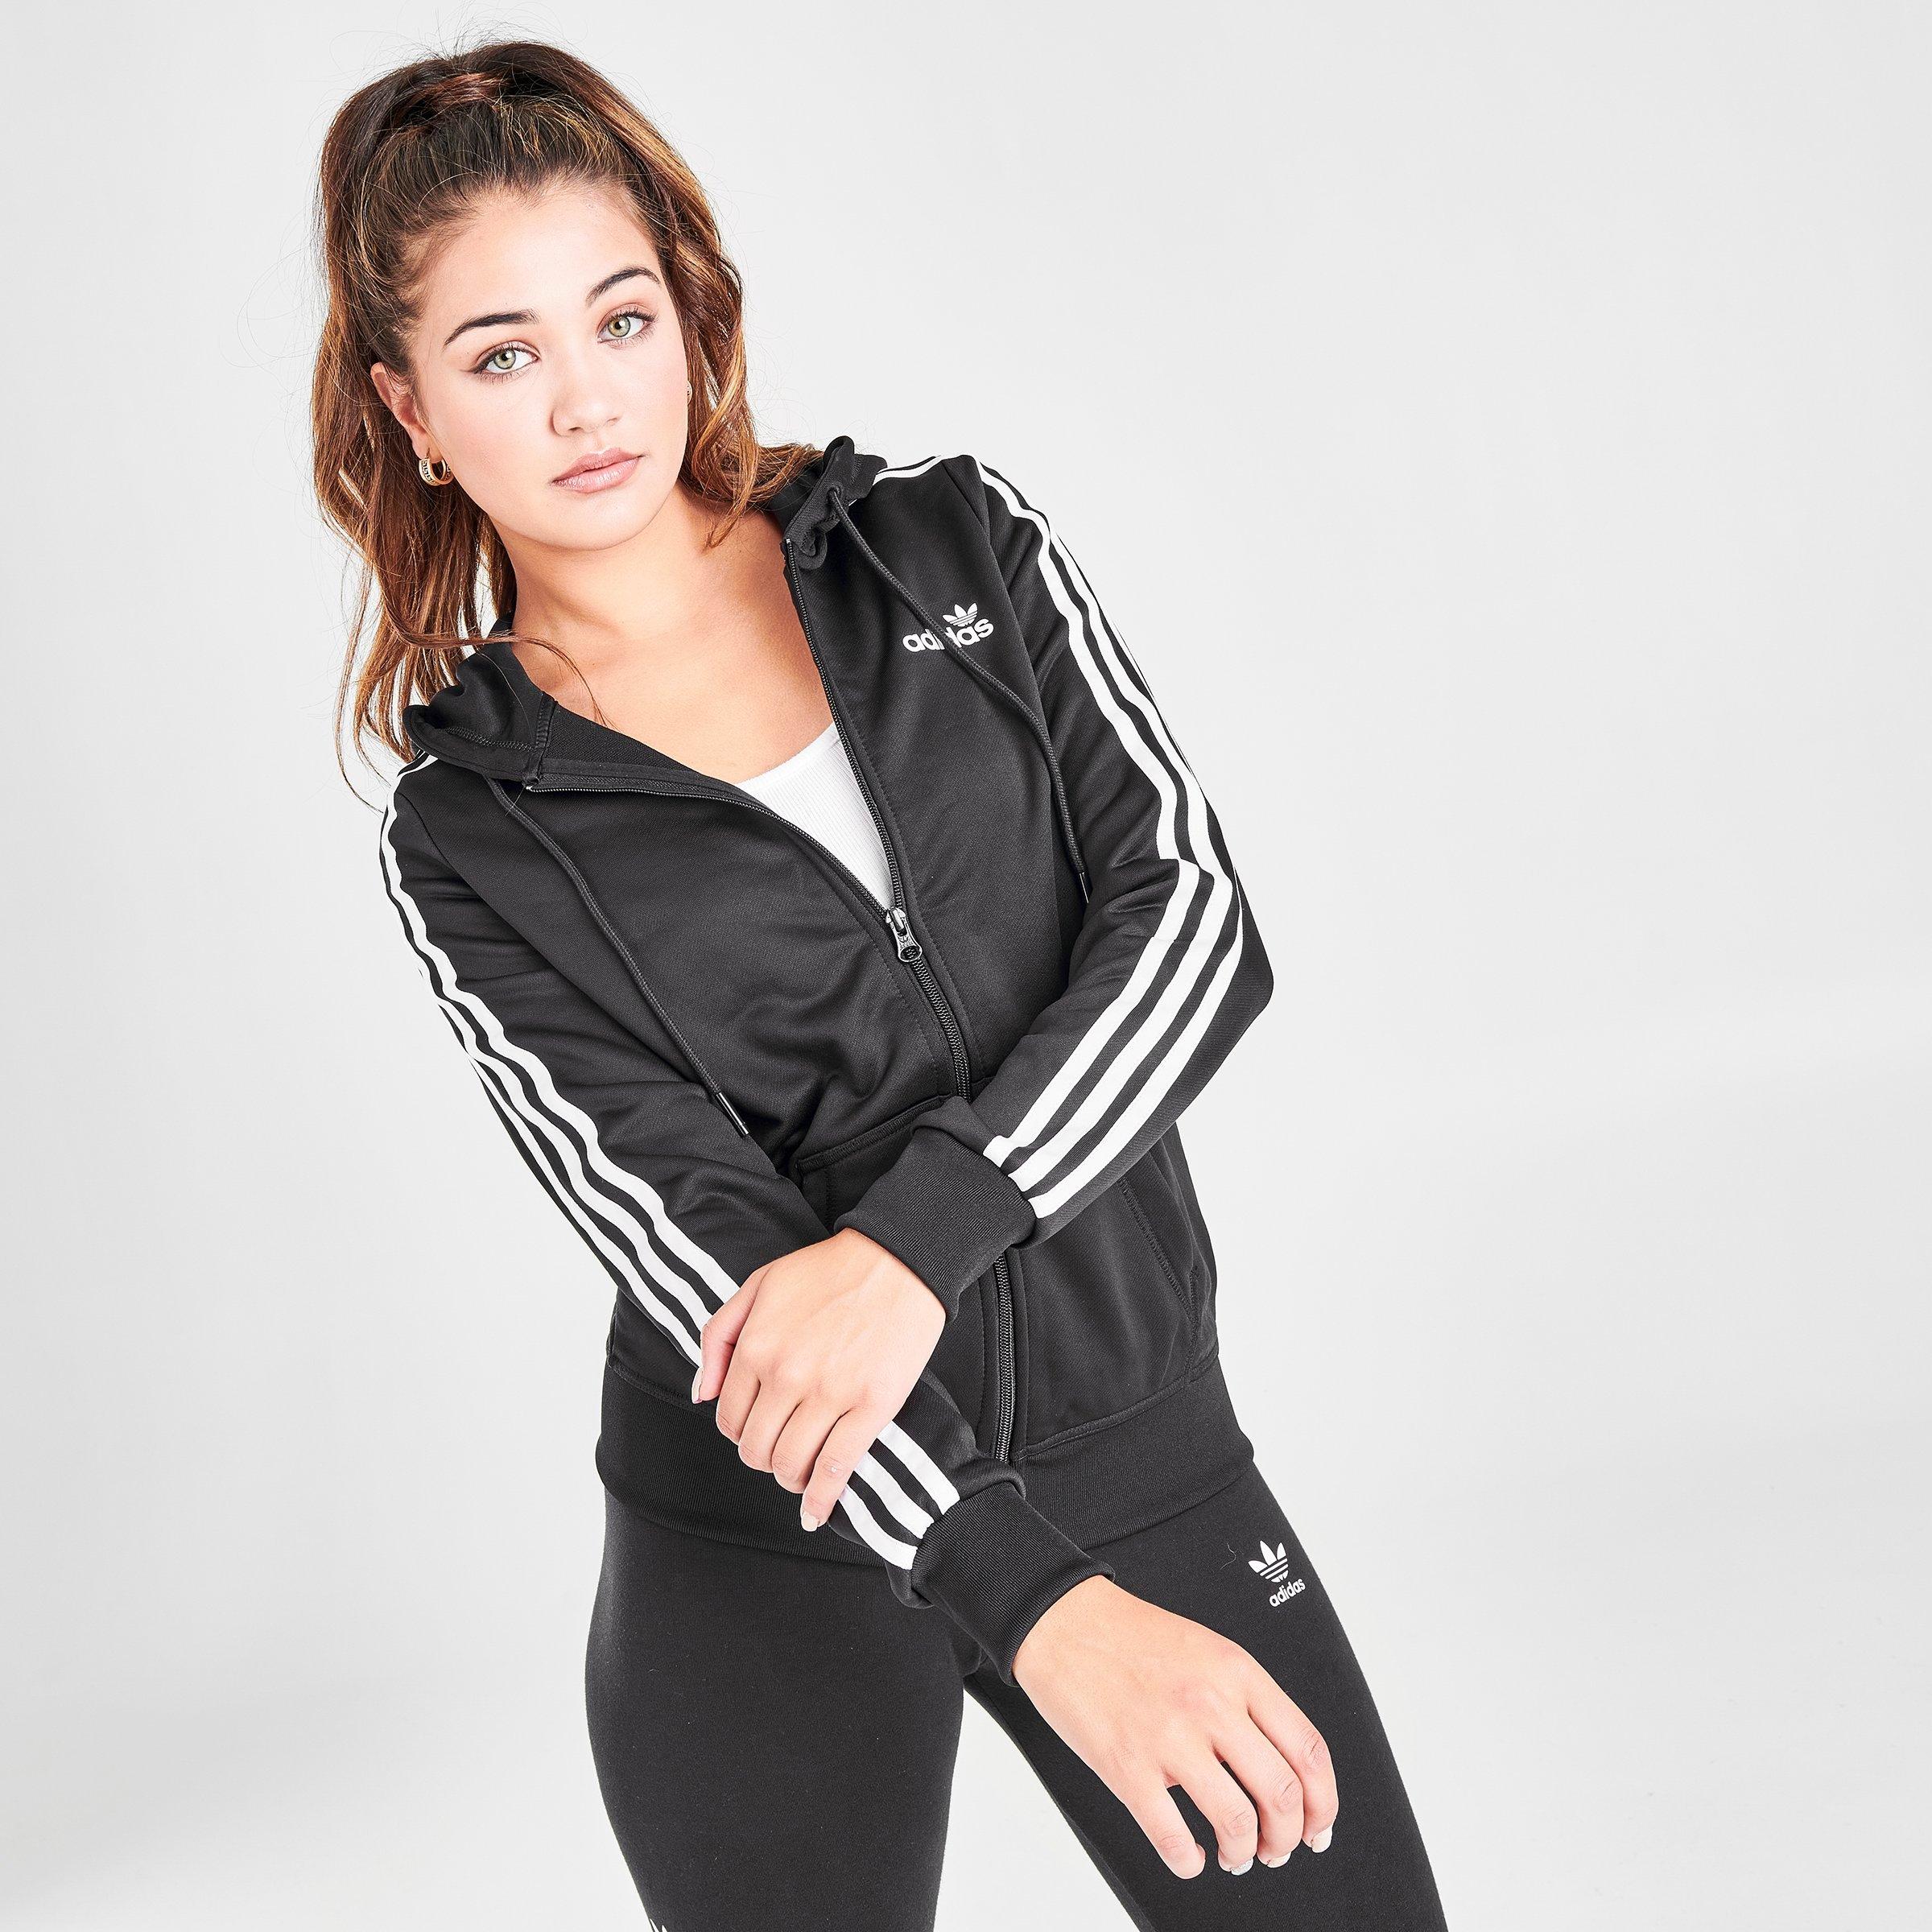 adidas women's clothes for sale